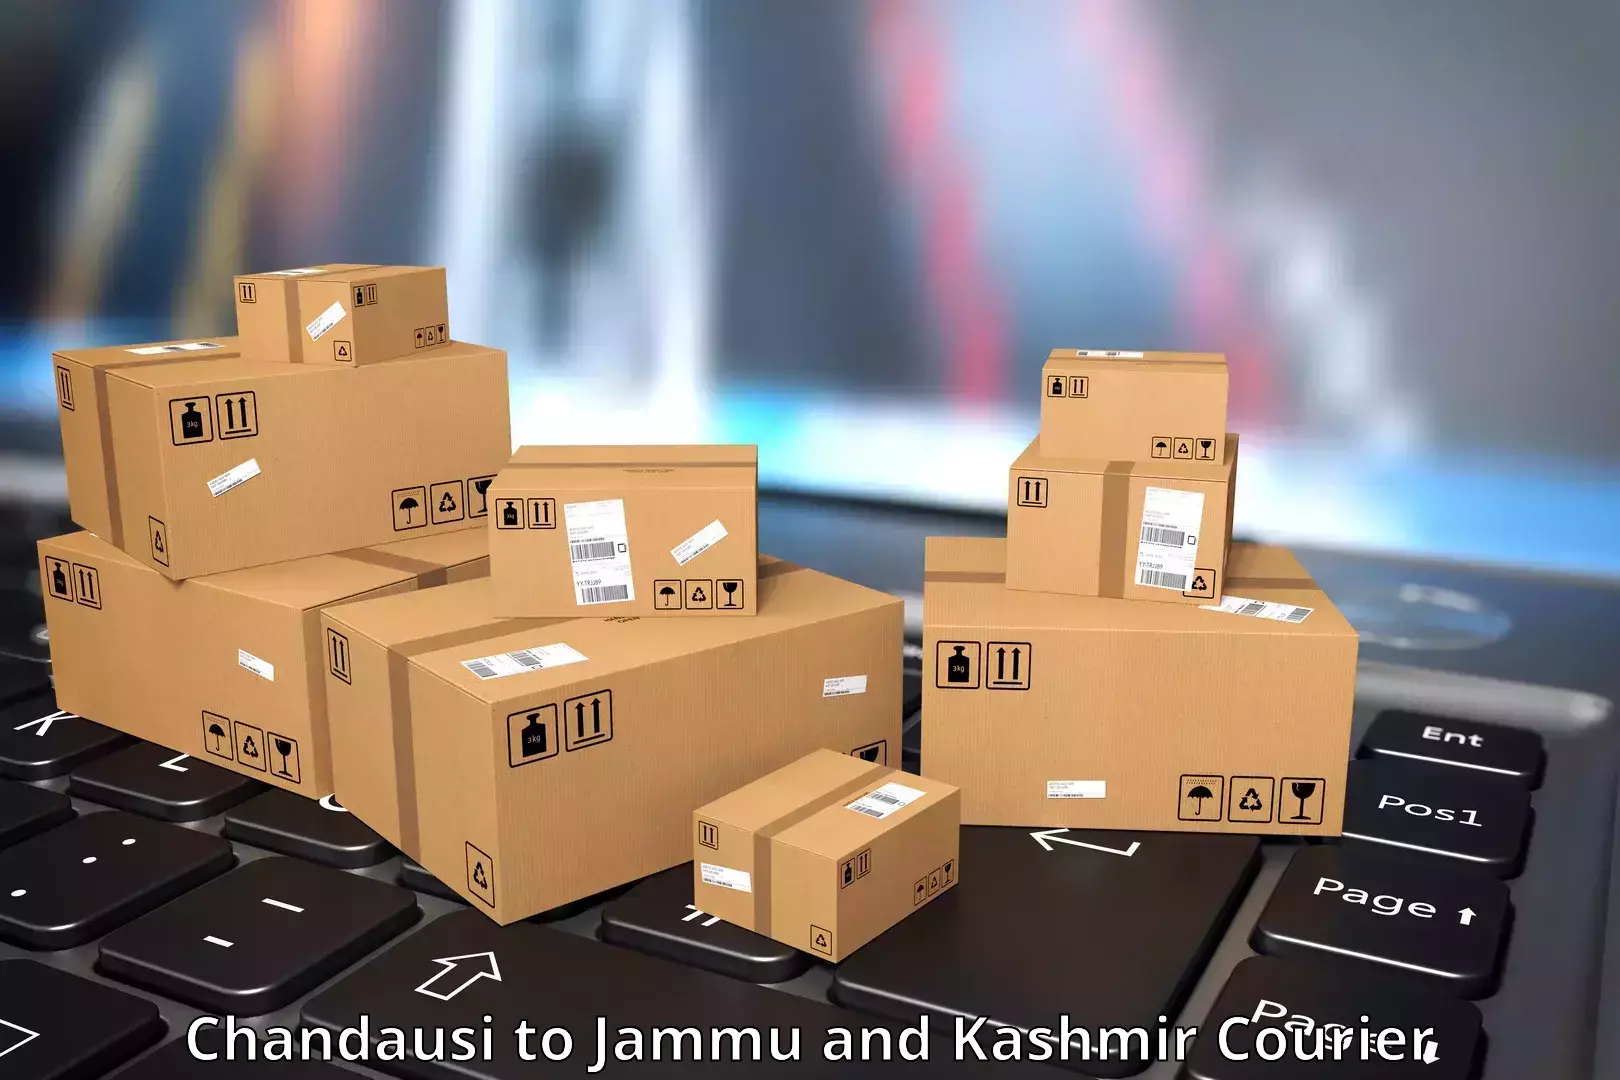 Express delivery capabilities Chandausi to Budgam